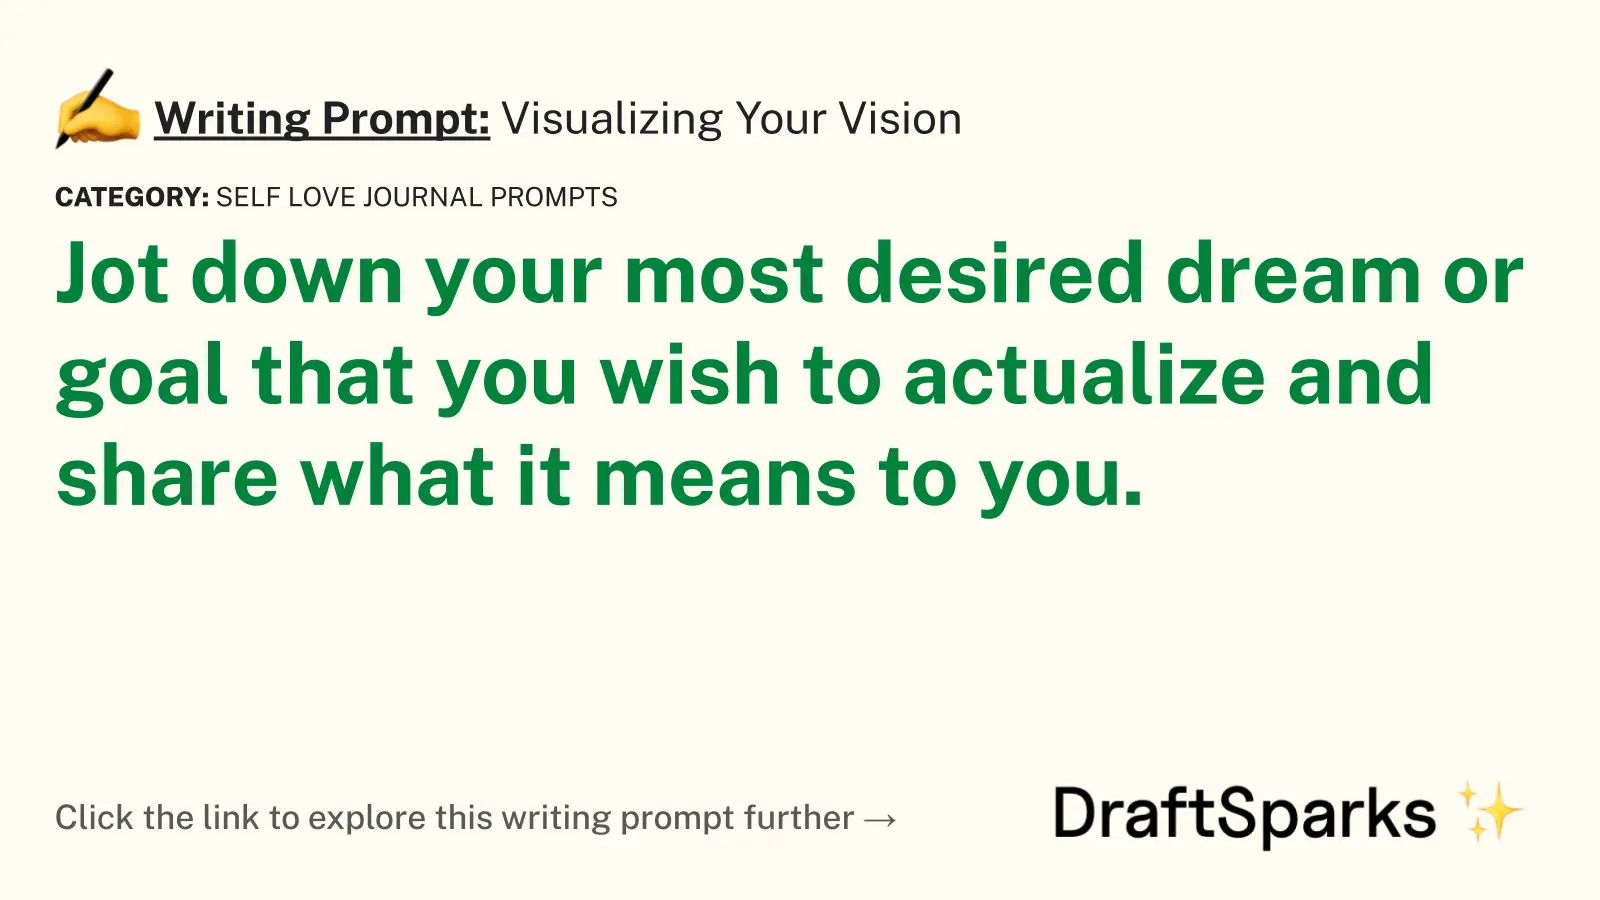 Visualizing Your Vision